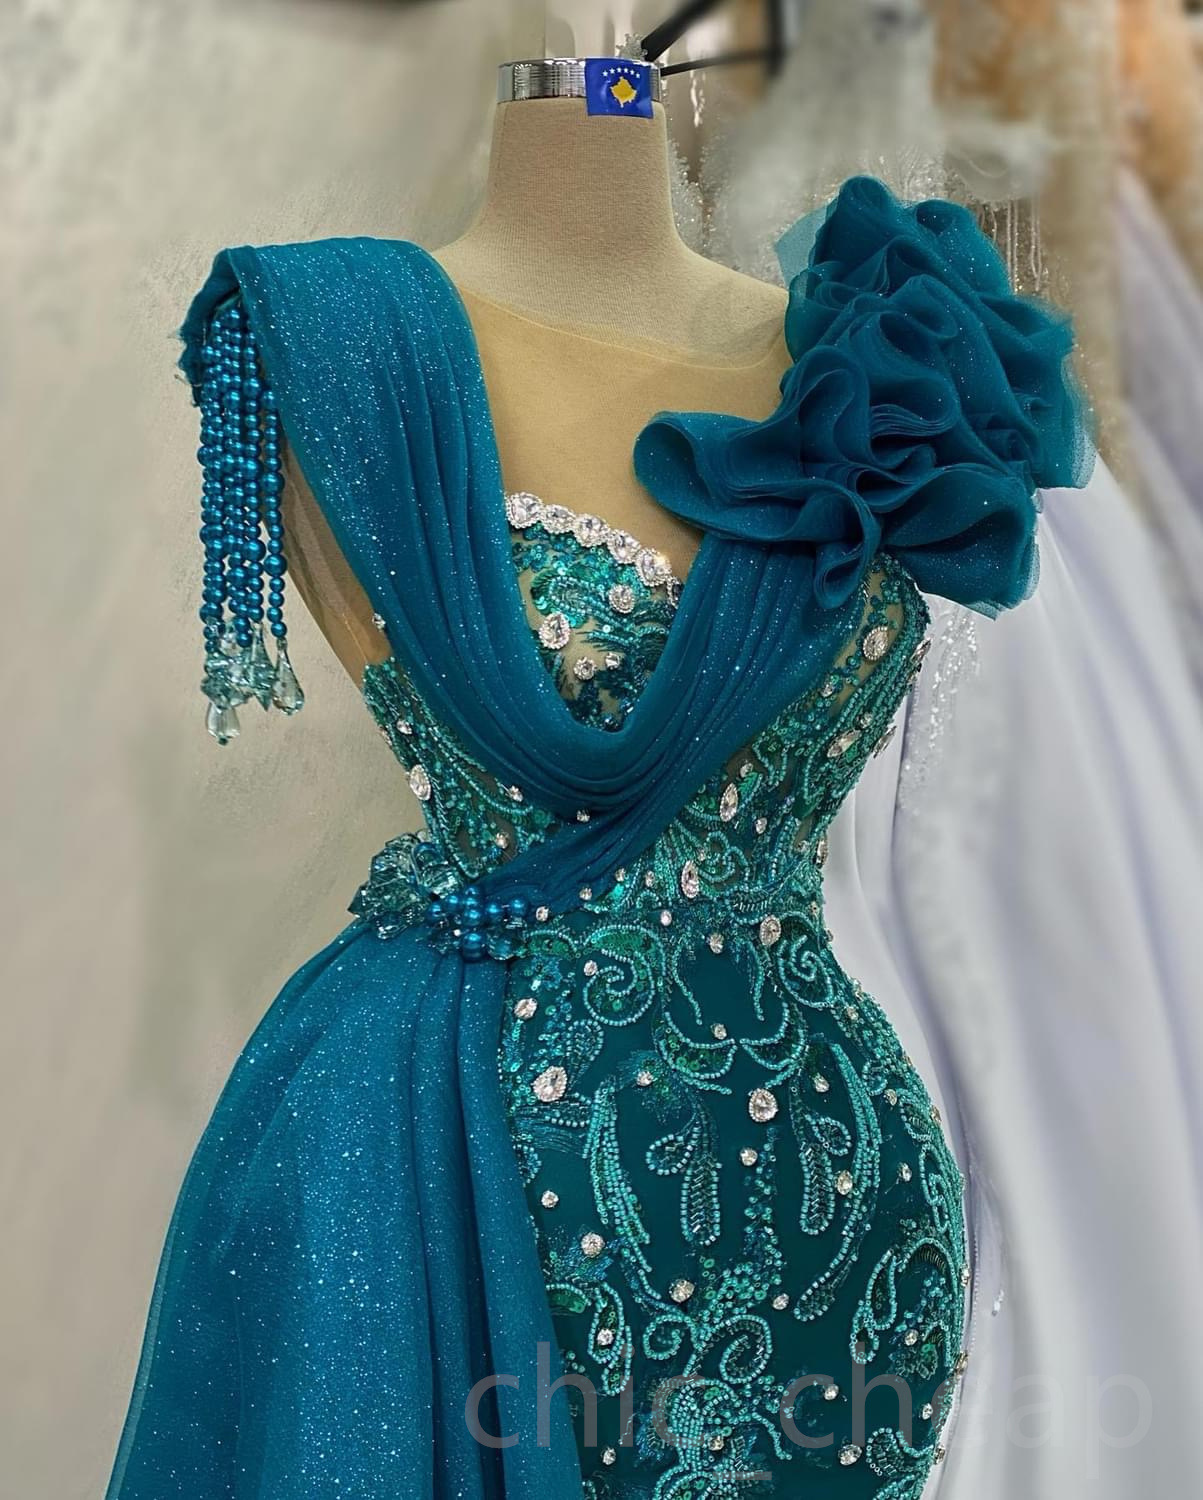 2023 May Aso Ebi Beaded Crystals Prom Dress Mermaid Sequined Lace Evening Formal Party Second Reception Birthday Engagement Gowns Dresses Robe De Soiree ZJ345